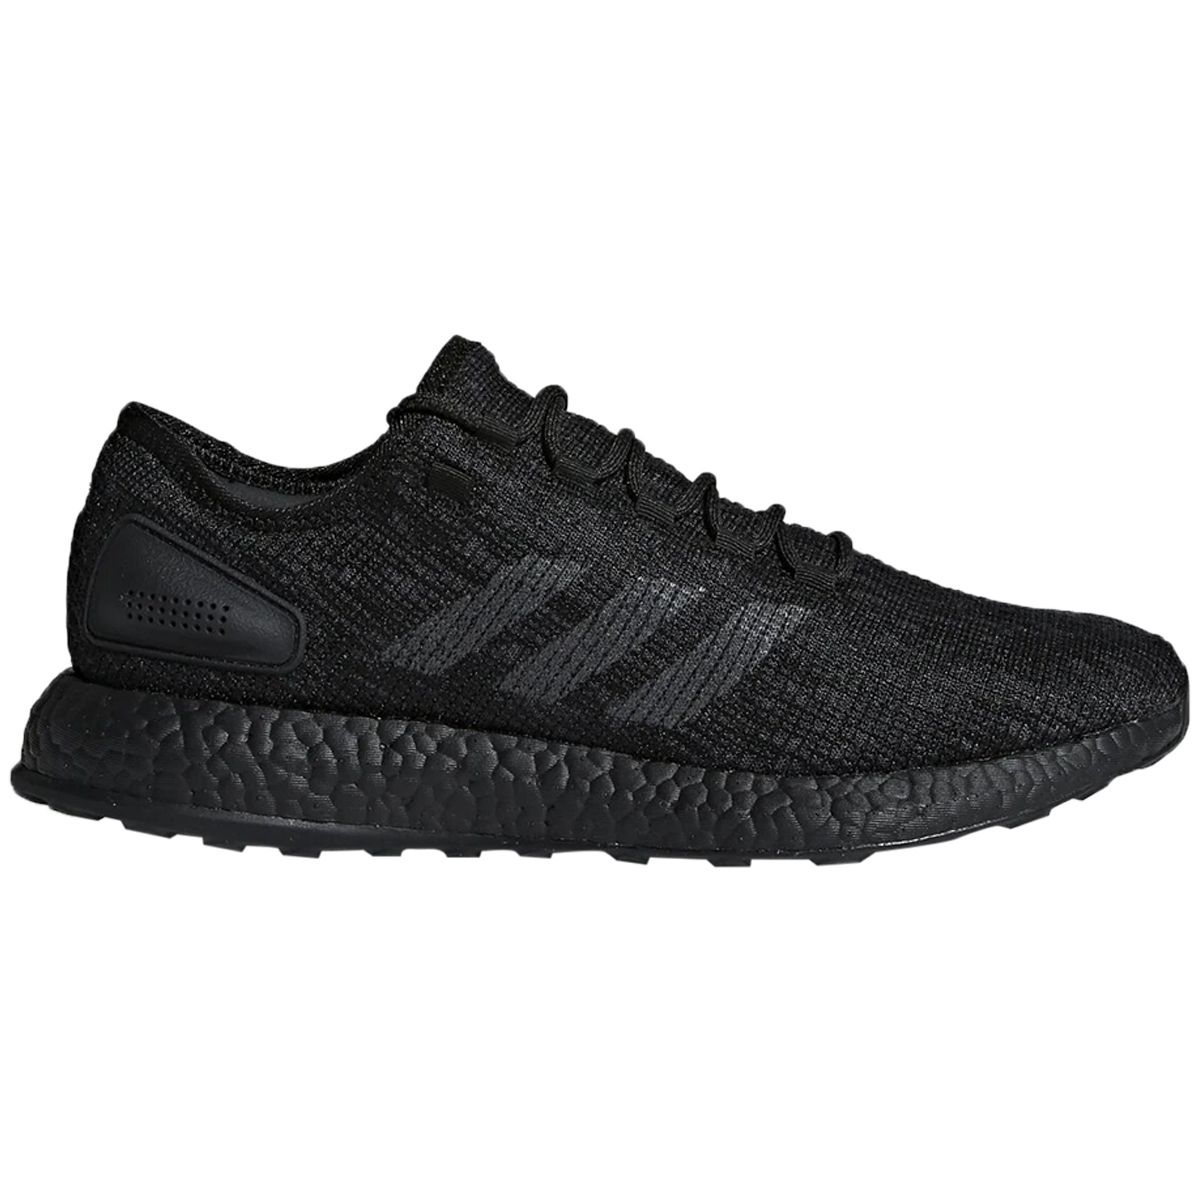 Adidas Pure Boost Mens Style : Cm8304